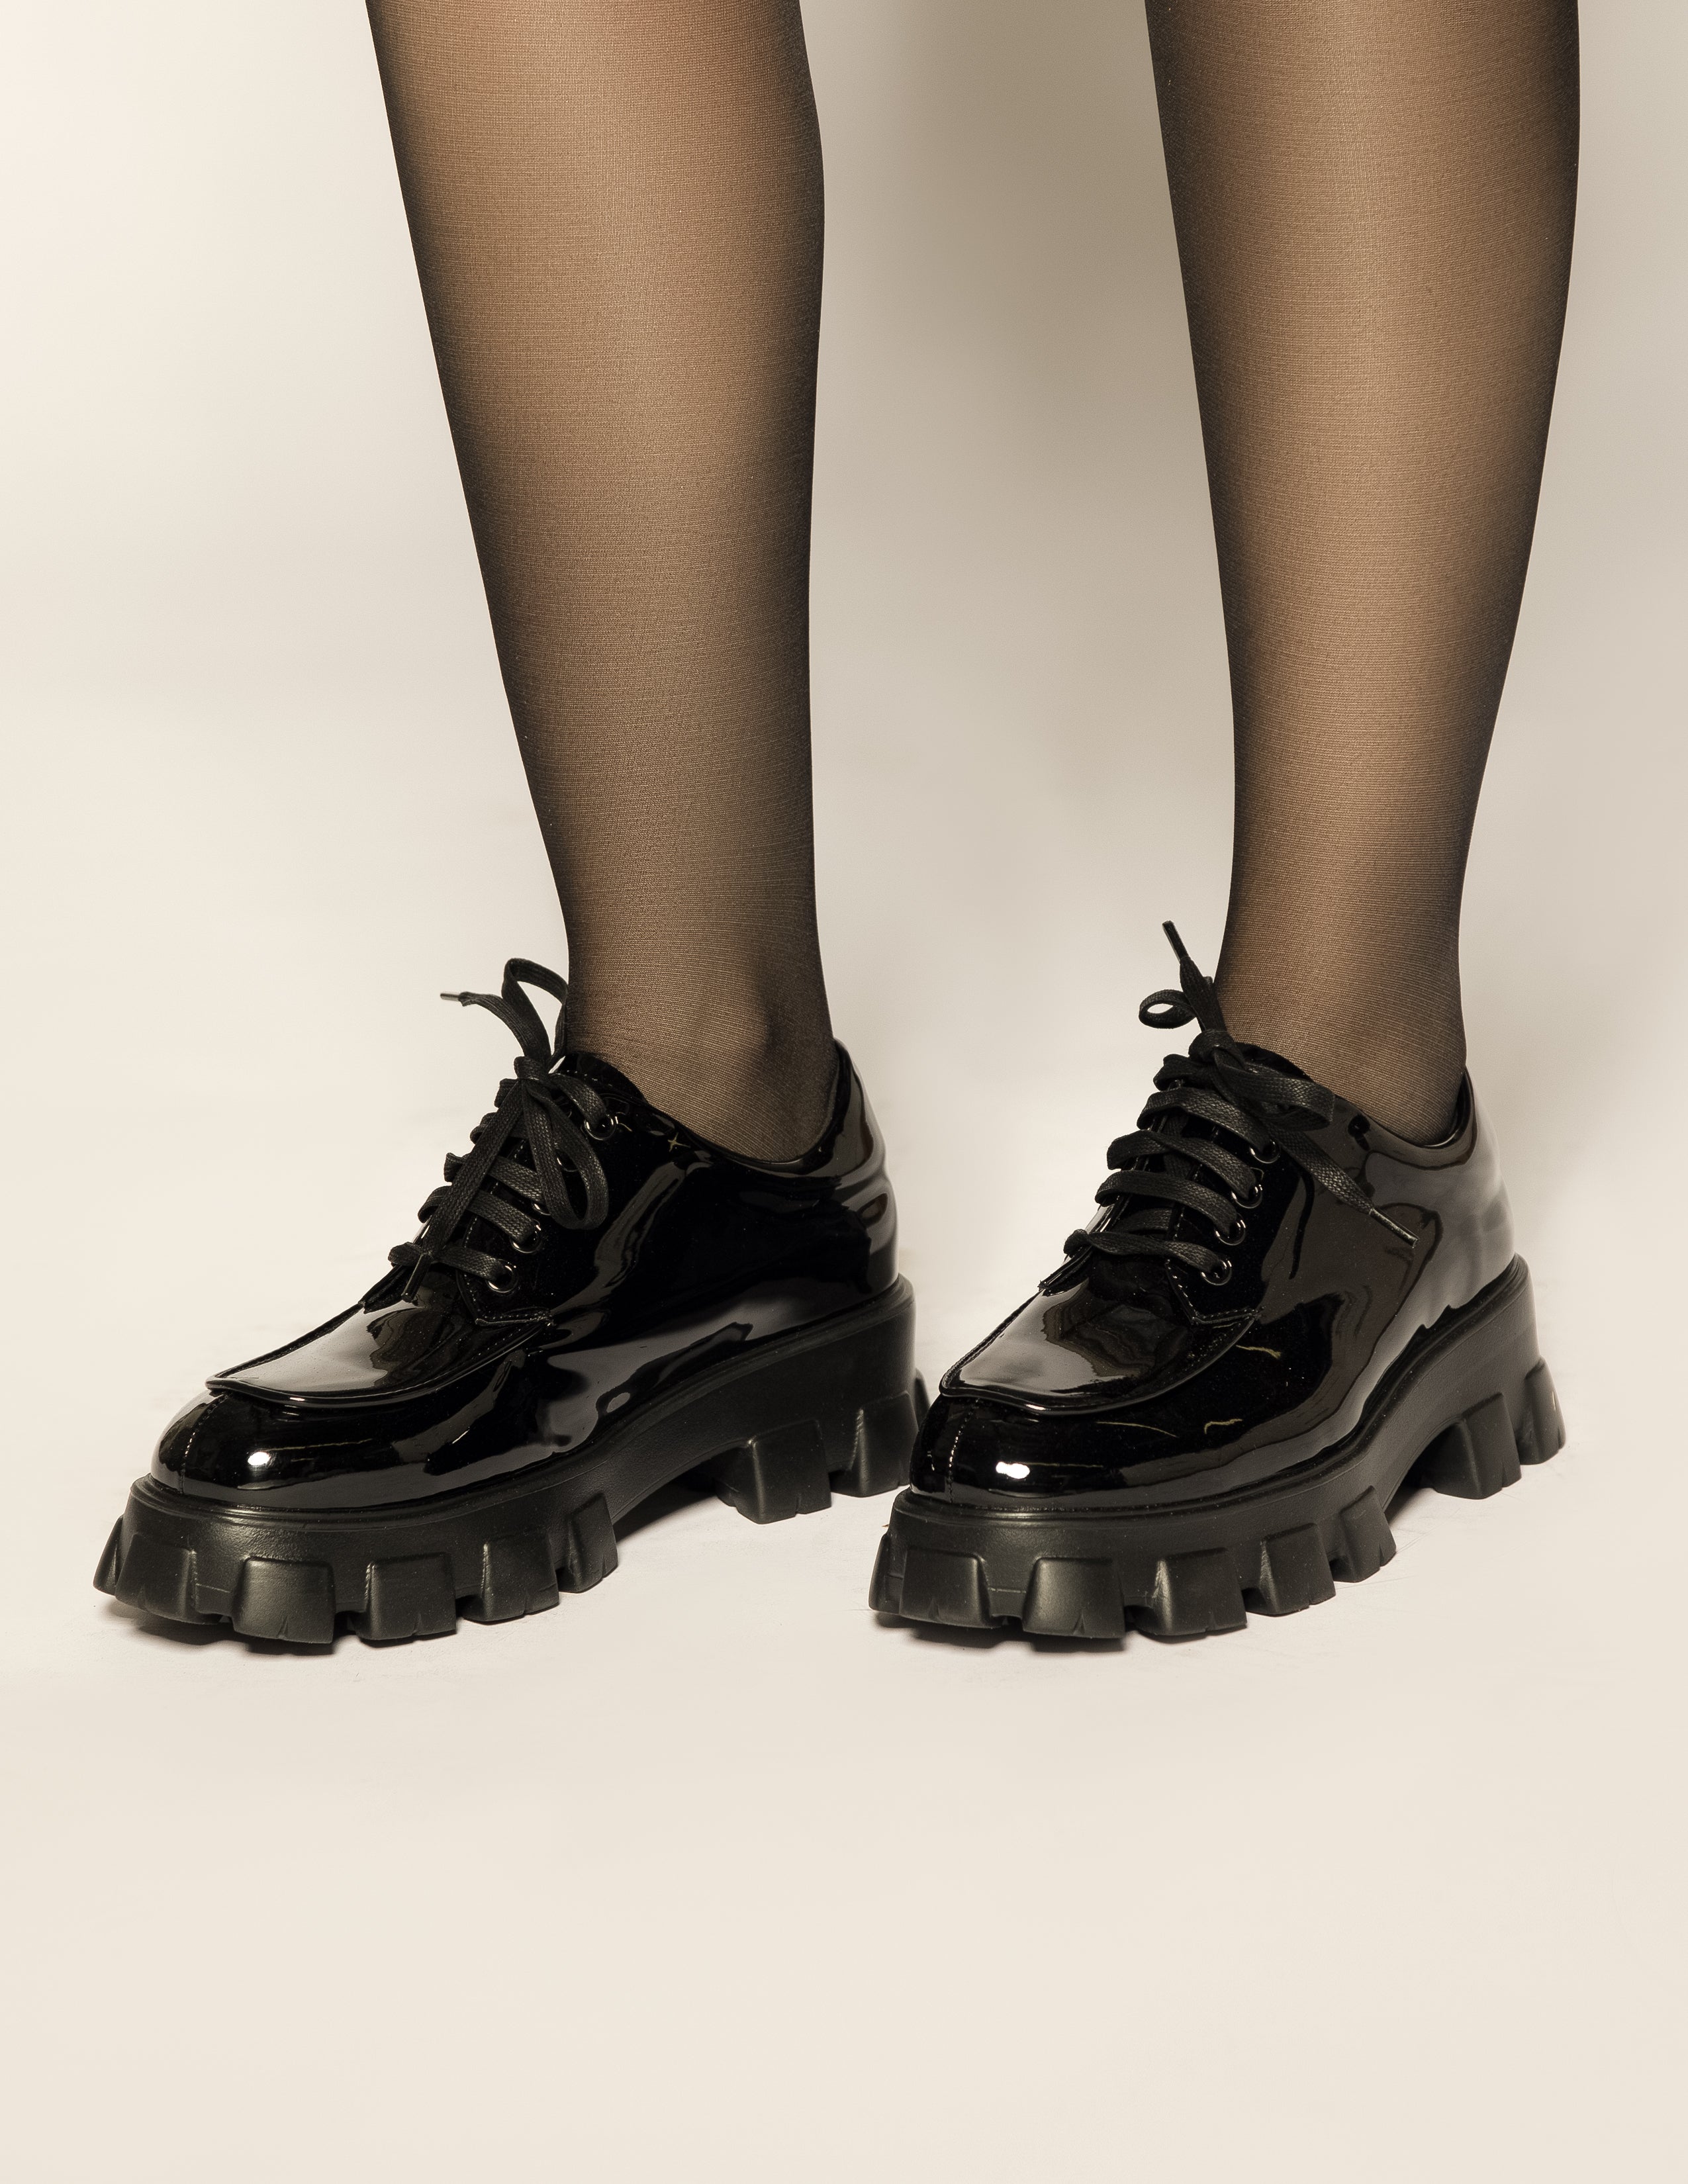 Patent Leather Lace-Up Shoes